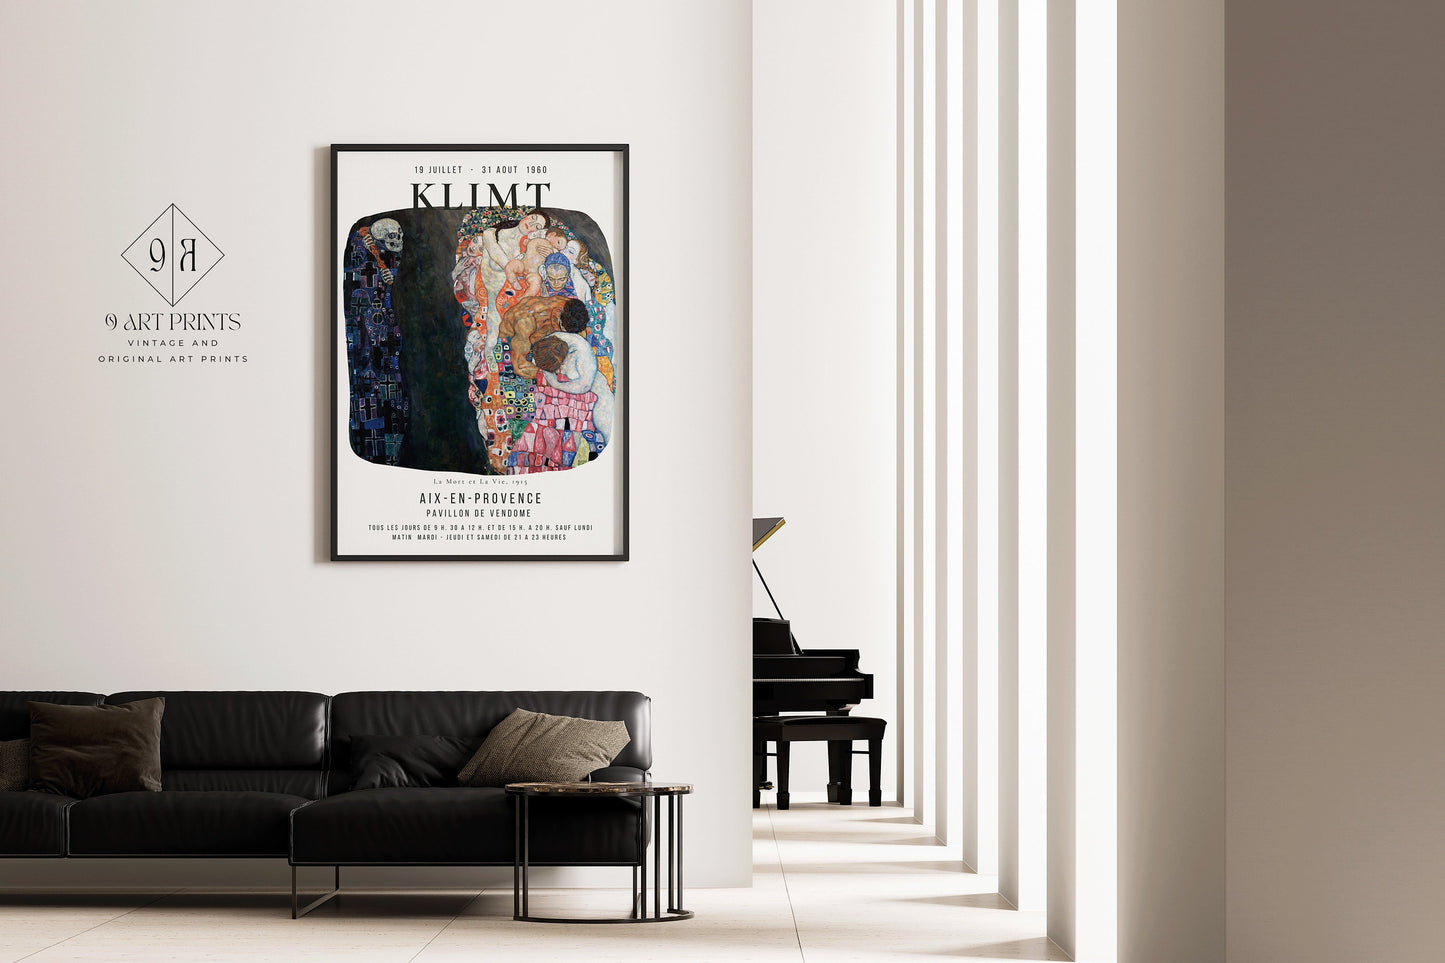 Gustav Klimt Death and Life Poster Fine Art Famous Painting Vintage Exhibition Ready to hang Framed Home Office Decor Museum Print Gift Idea